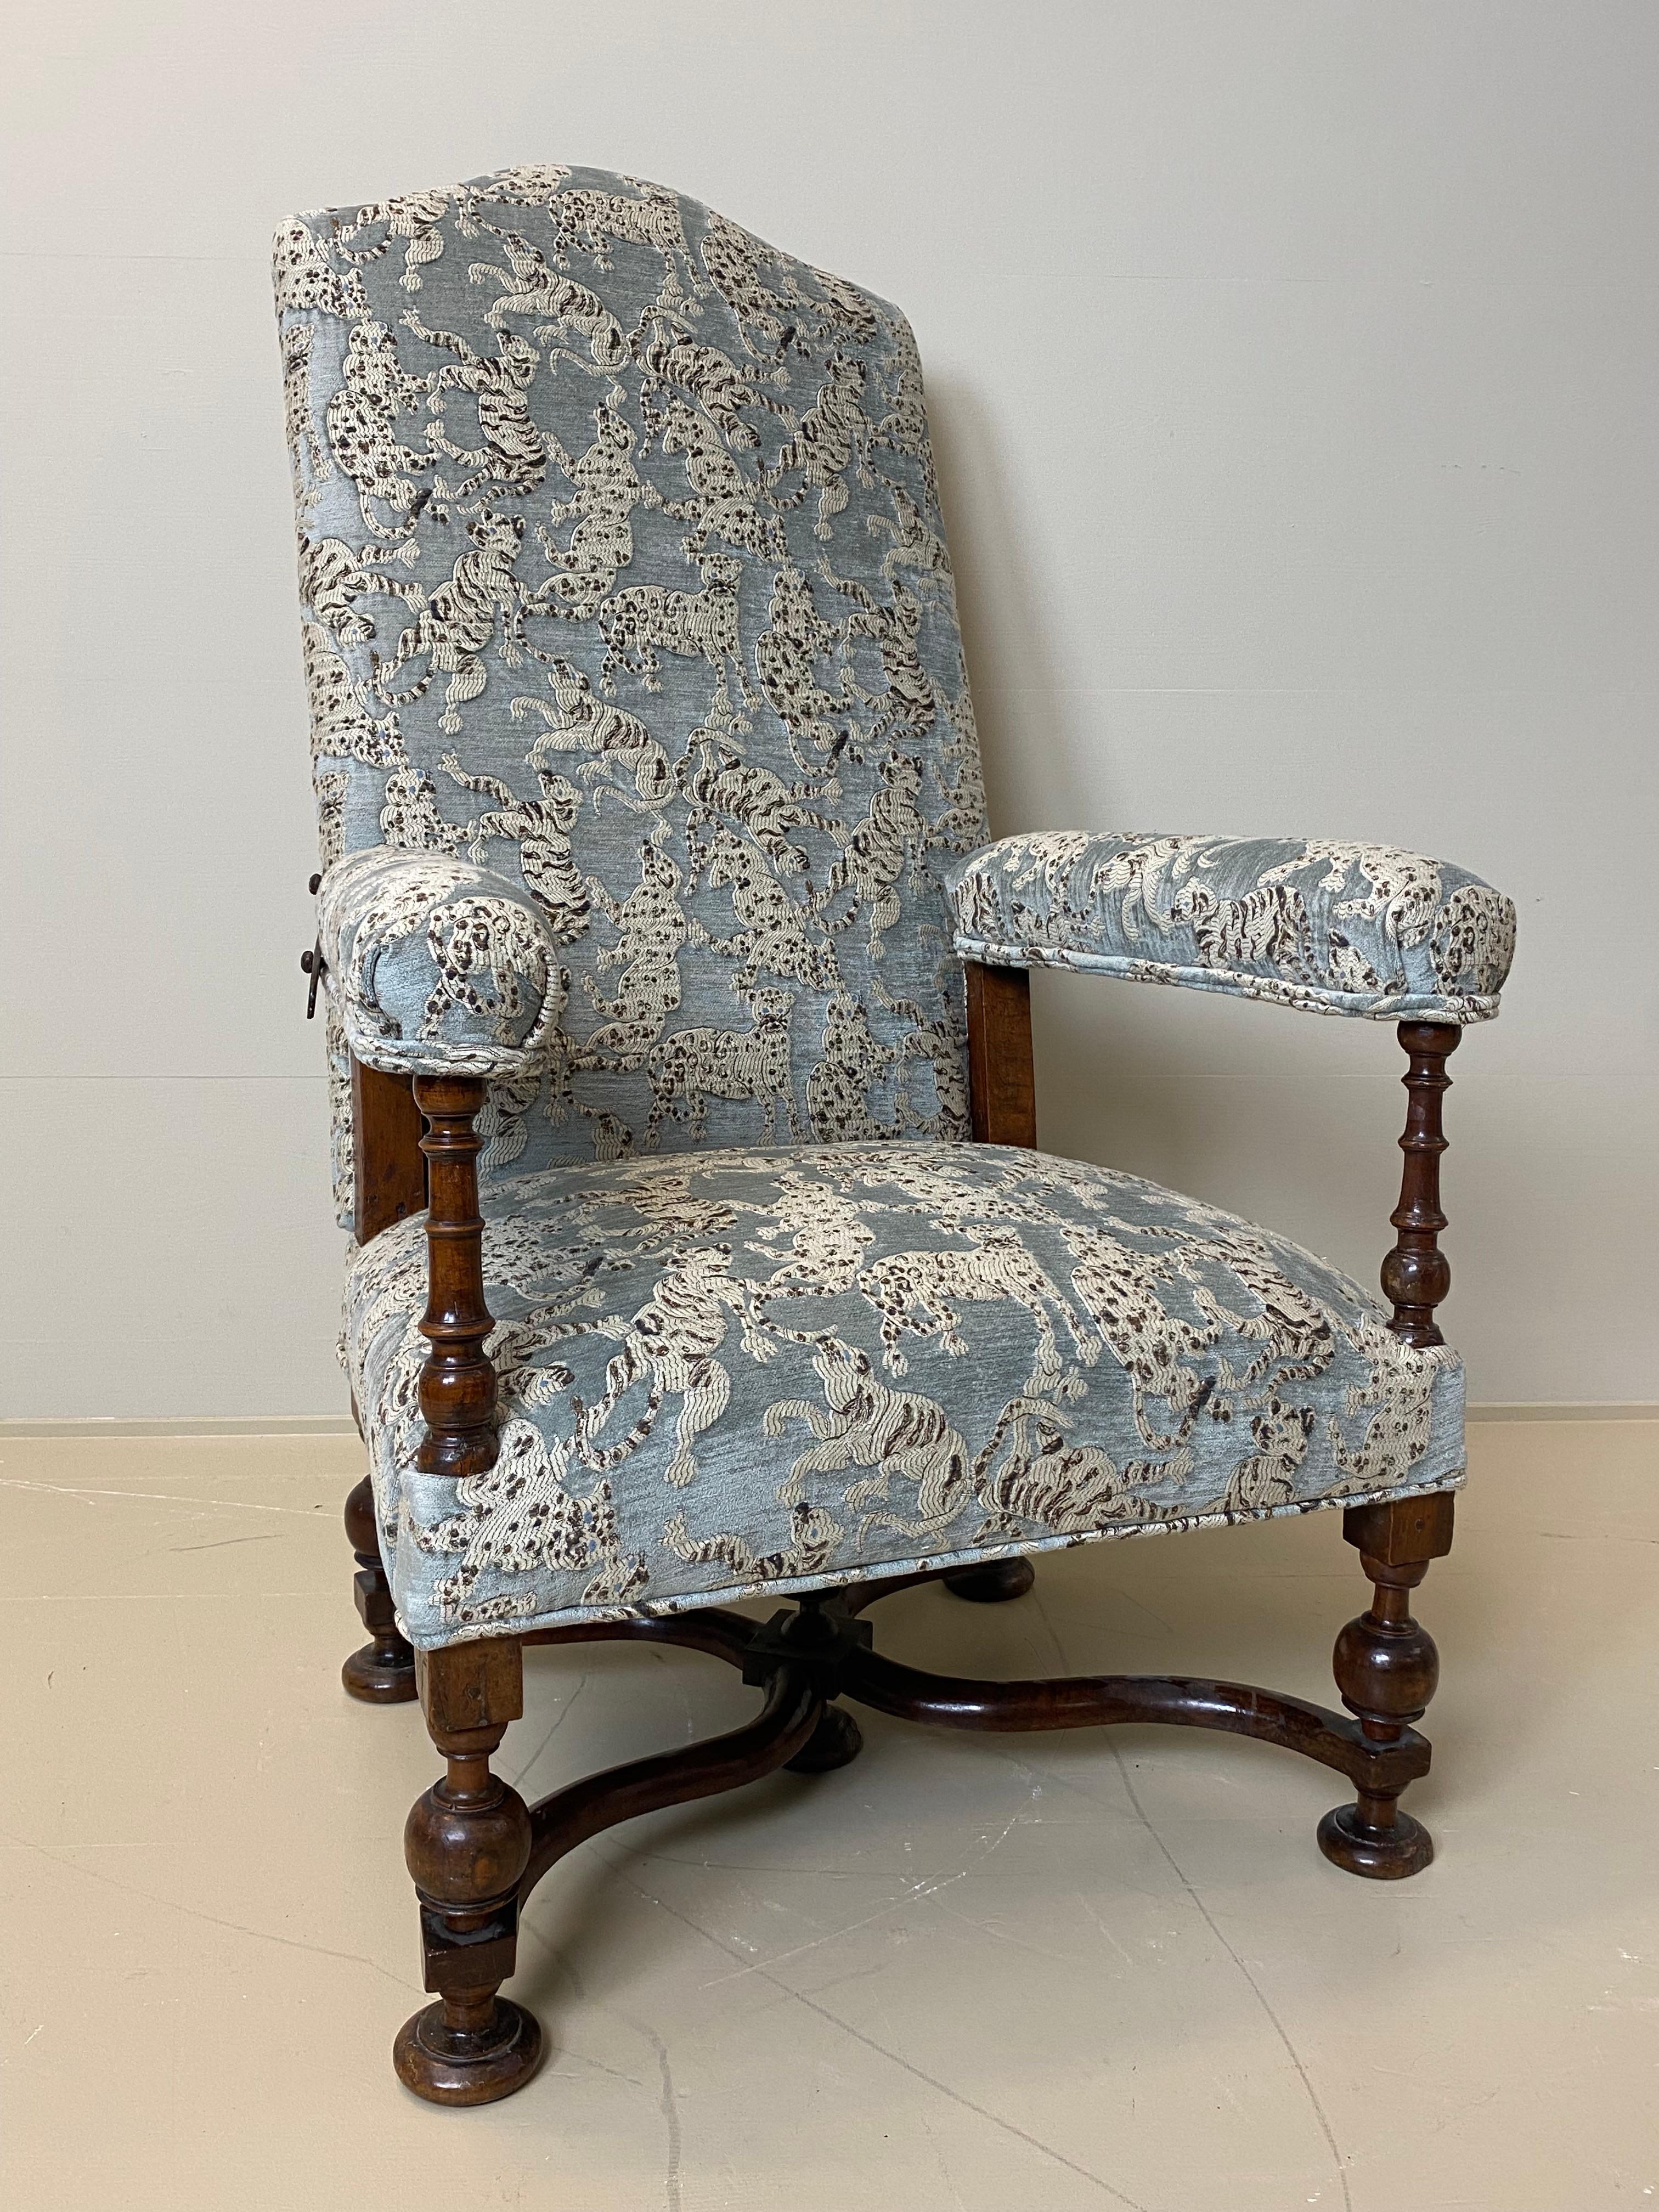 Beautiful French armchair with movable back,
good old patina and warm and worn finish,
new upholstered with Jim Thompson Fabric, Cats Pyjamas,
nice sculptured legs and stretchers